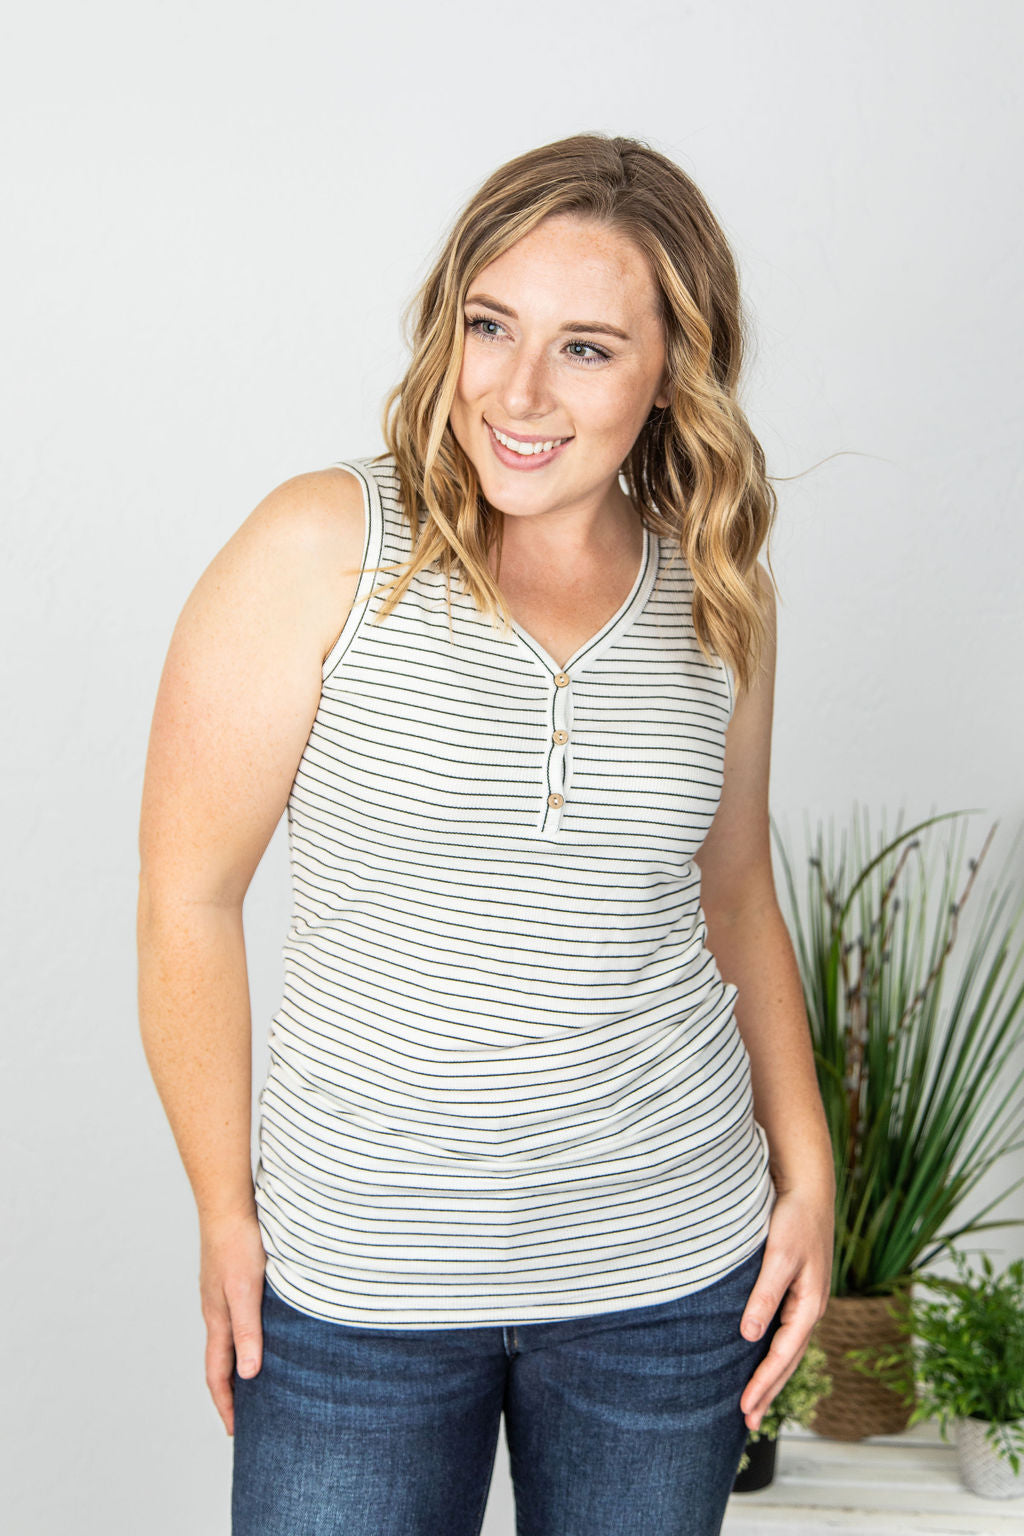 Addison Henley Tank - Ivory and Black Stripes - AnnRose Boutique